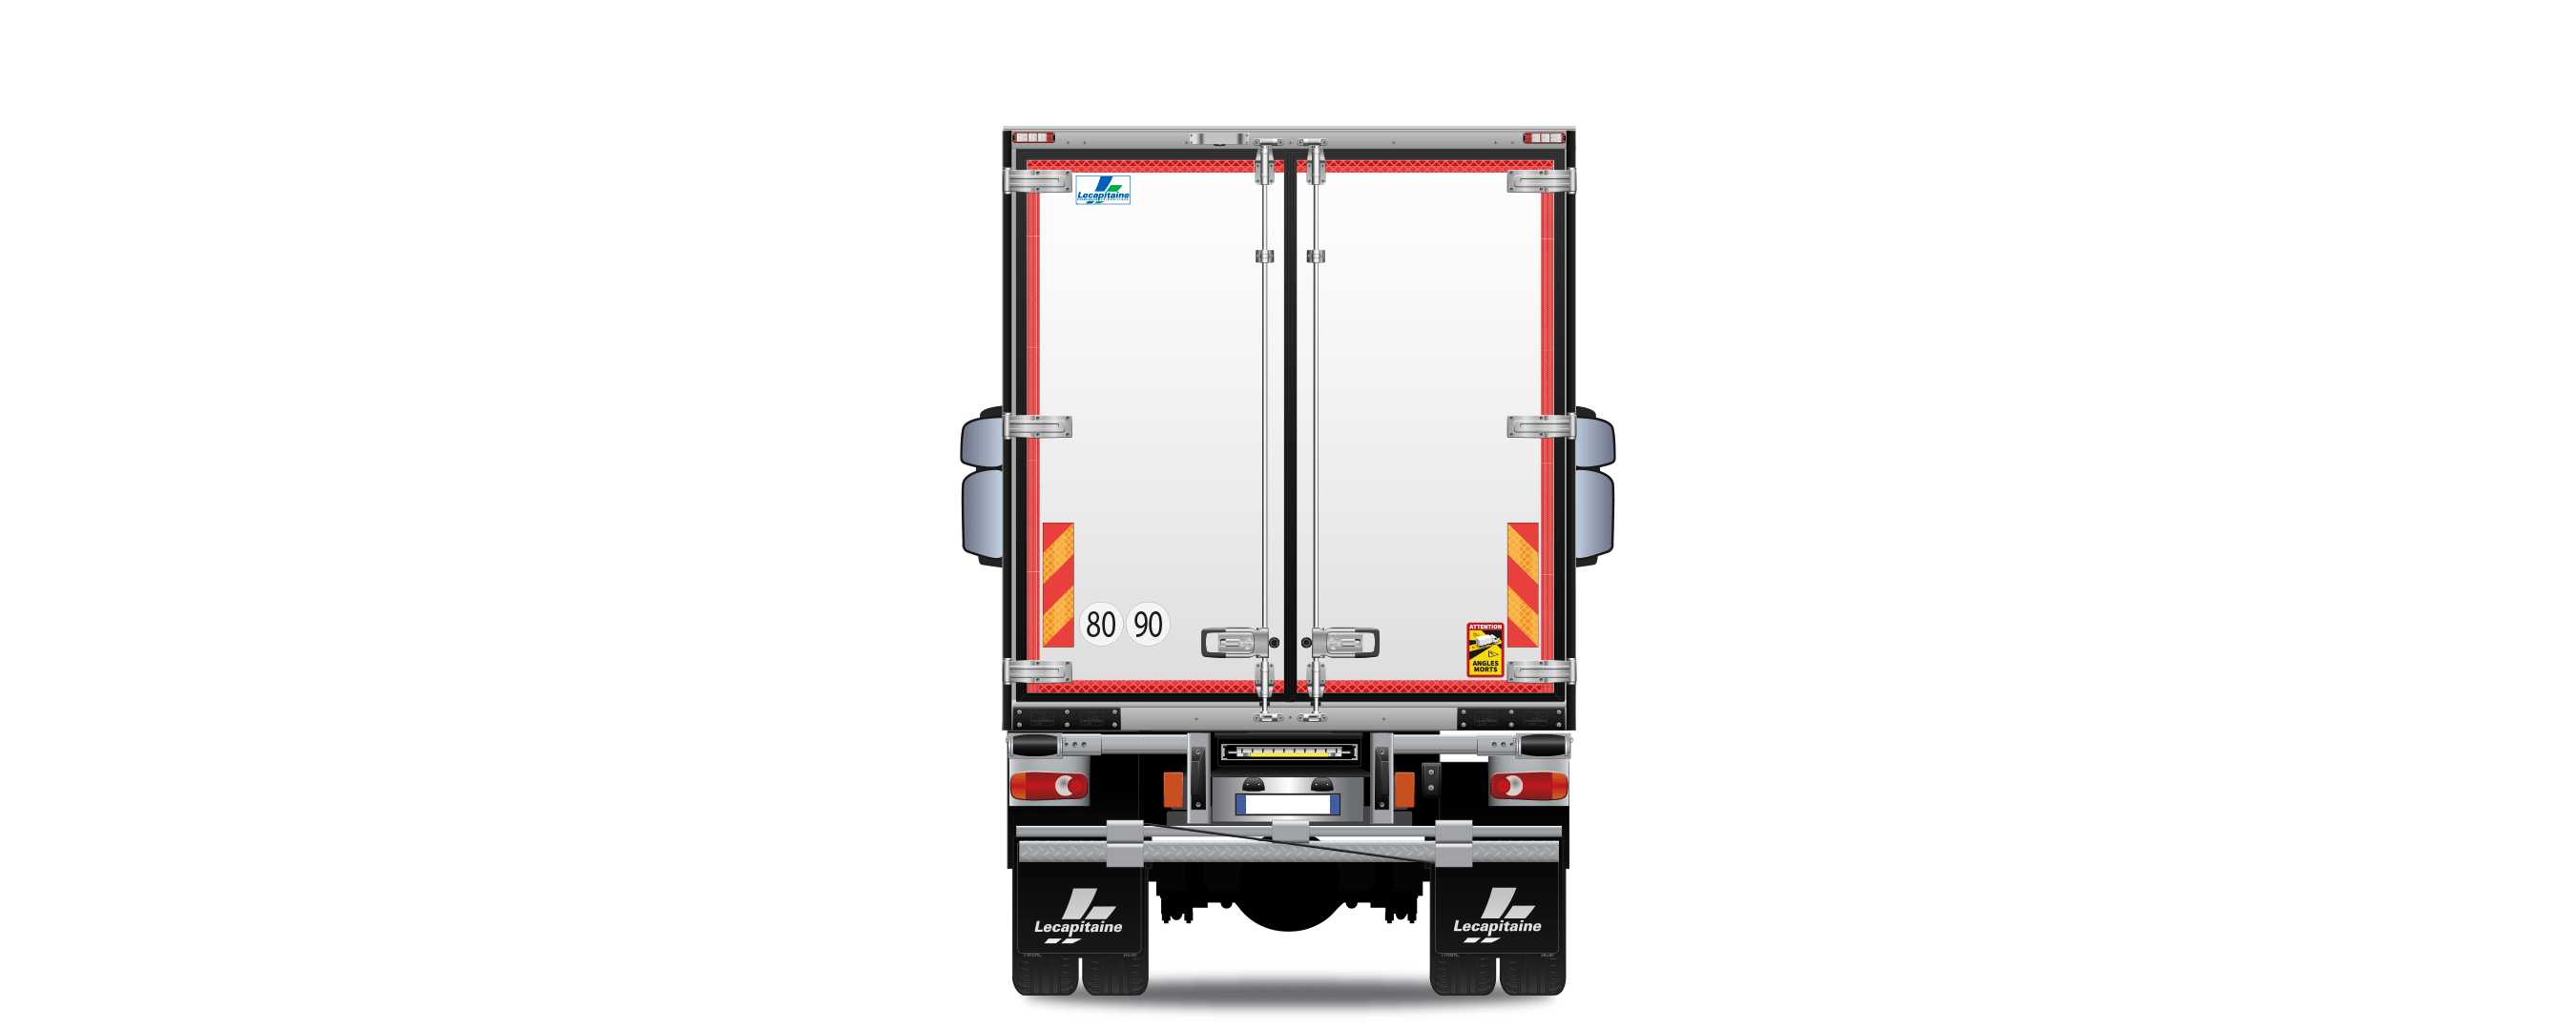 Actros 1827